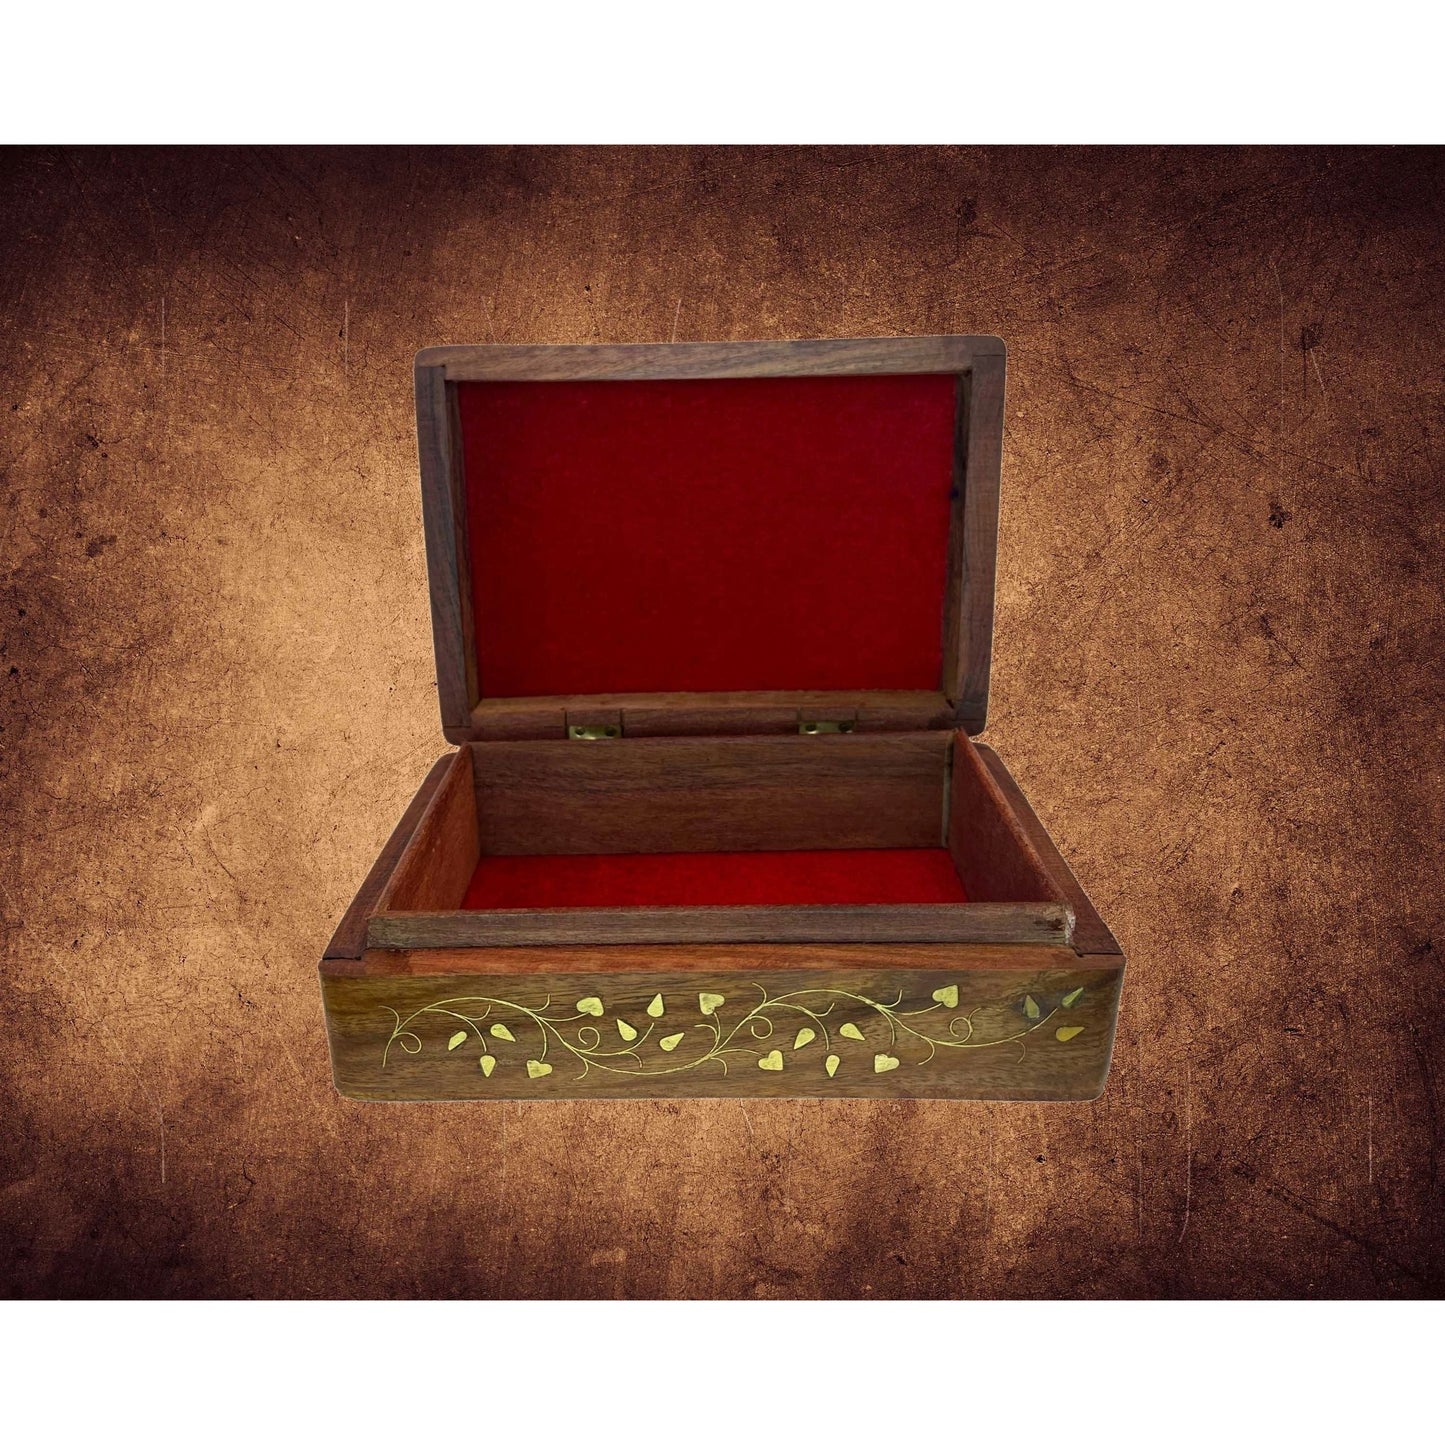 Wooden Floral Design Brass Inlay Decorative Box with Red Velvet Lining